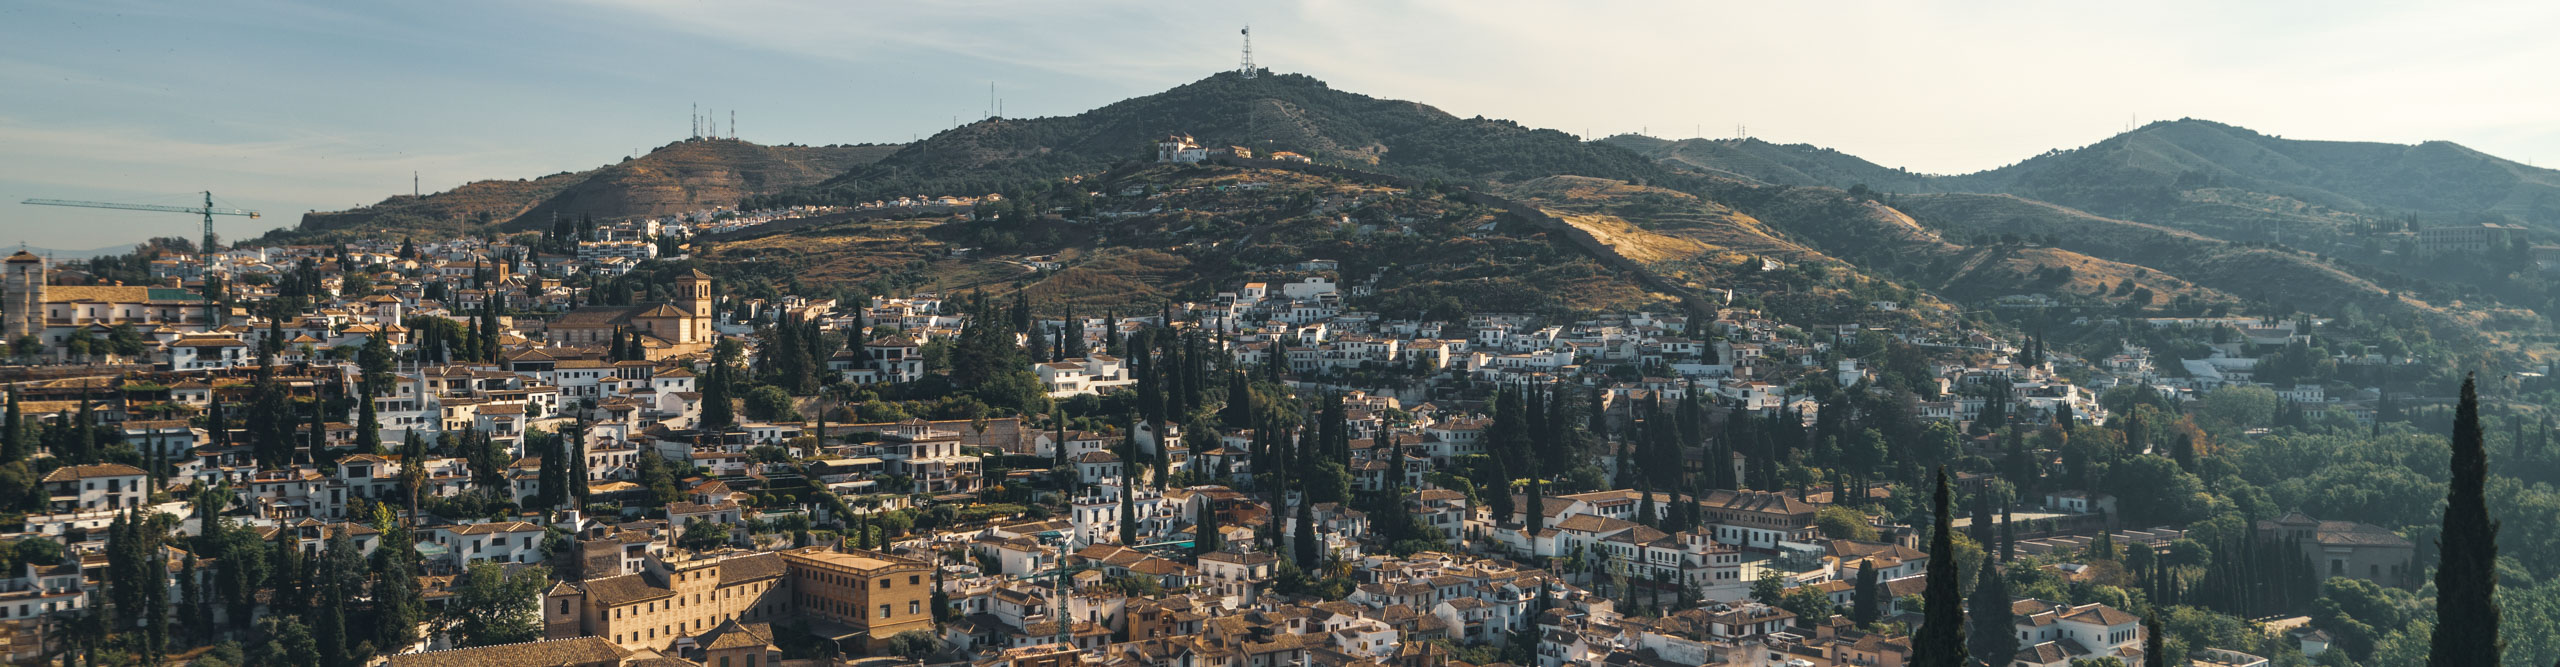 View of the Alhumbra a fortress in the late afternoon sun, in Andalusia, Spain, 